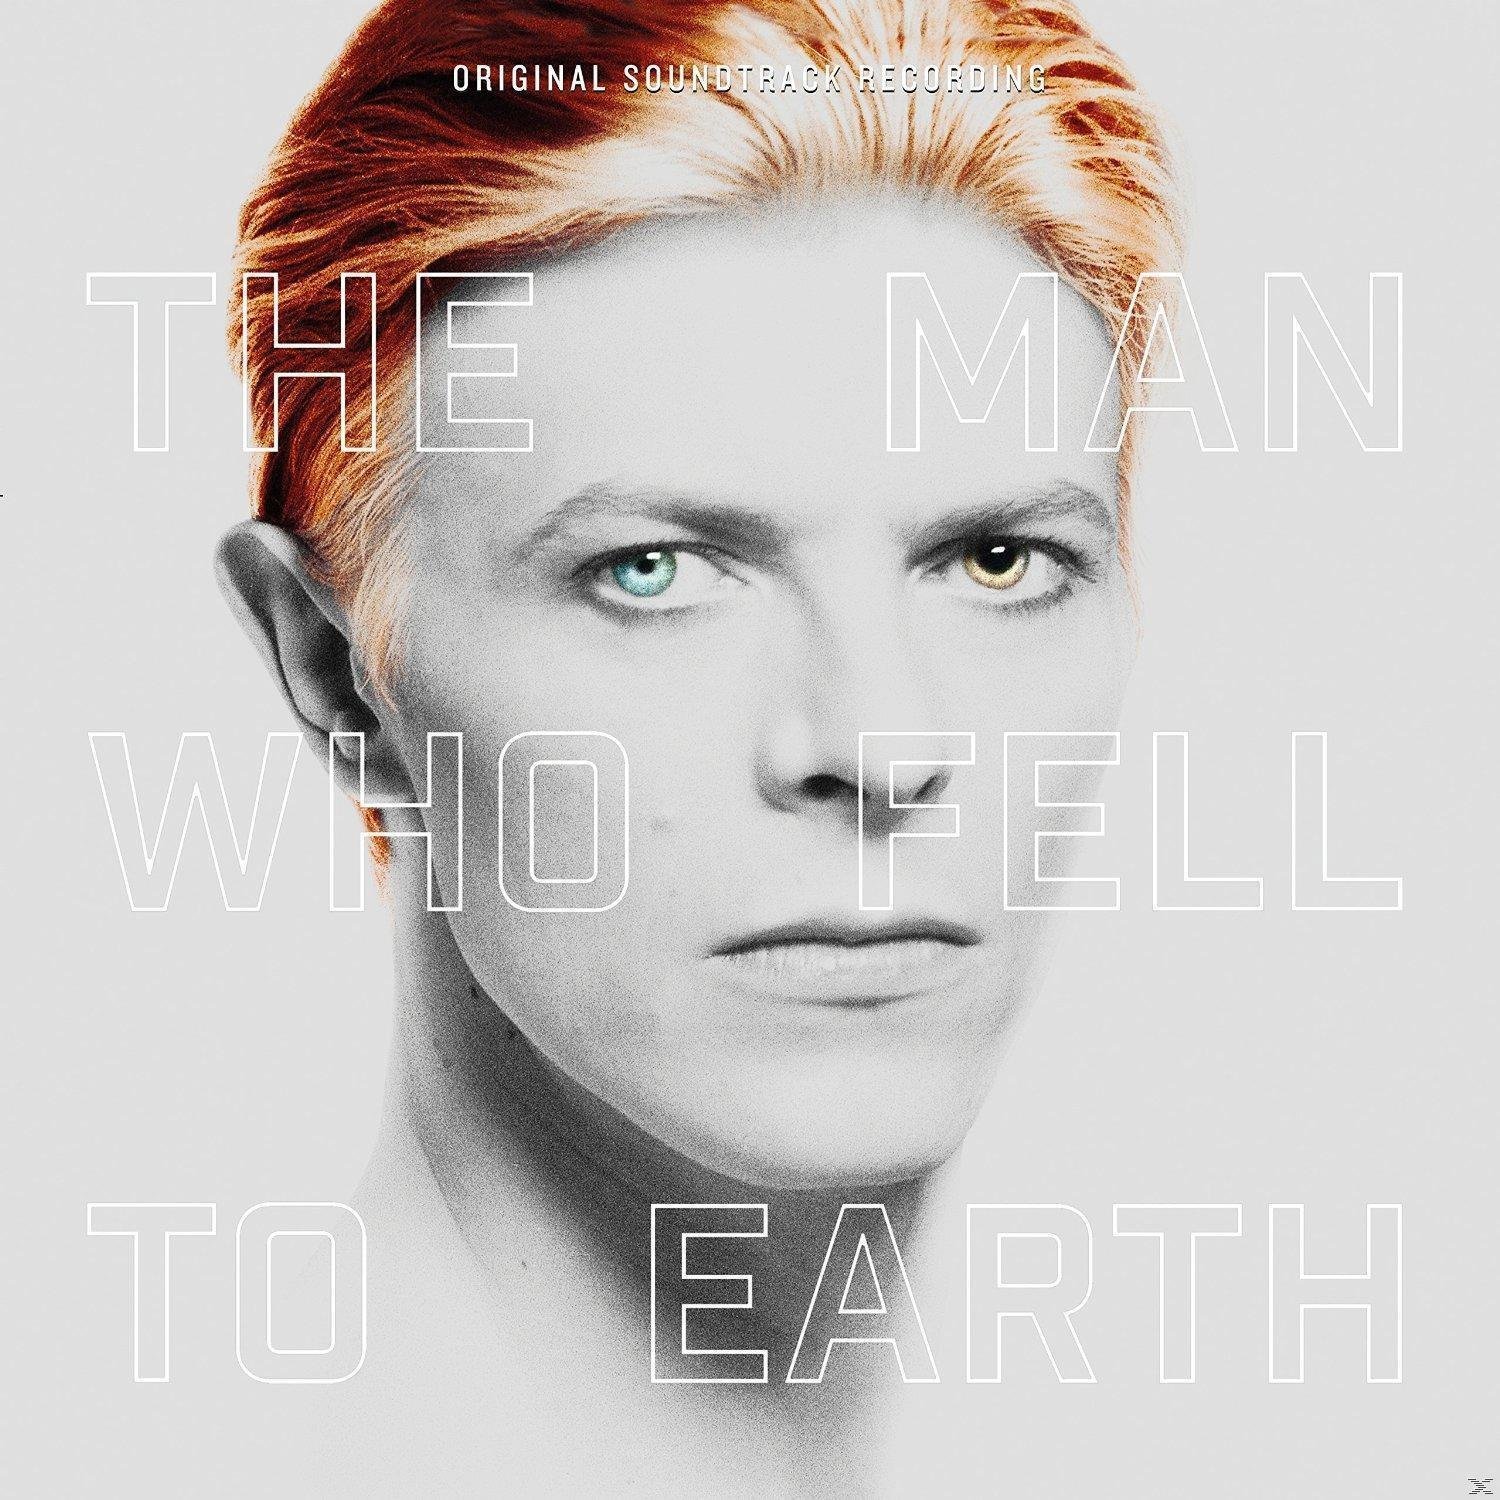 Disco de vinil David Bowie - The Man Who Fell To Earth OST (Starring David Bowie) (2 LP + 2 CD)